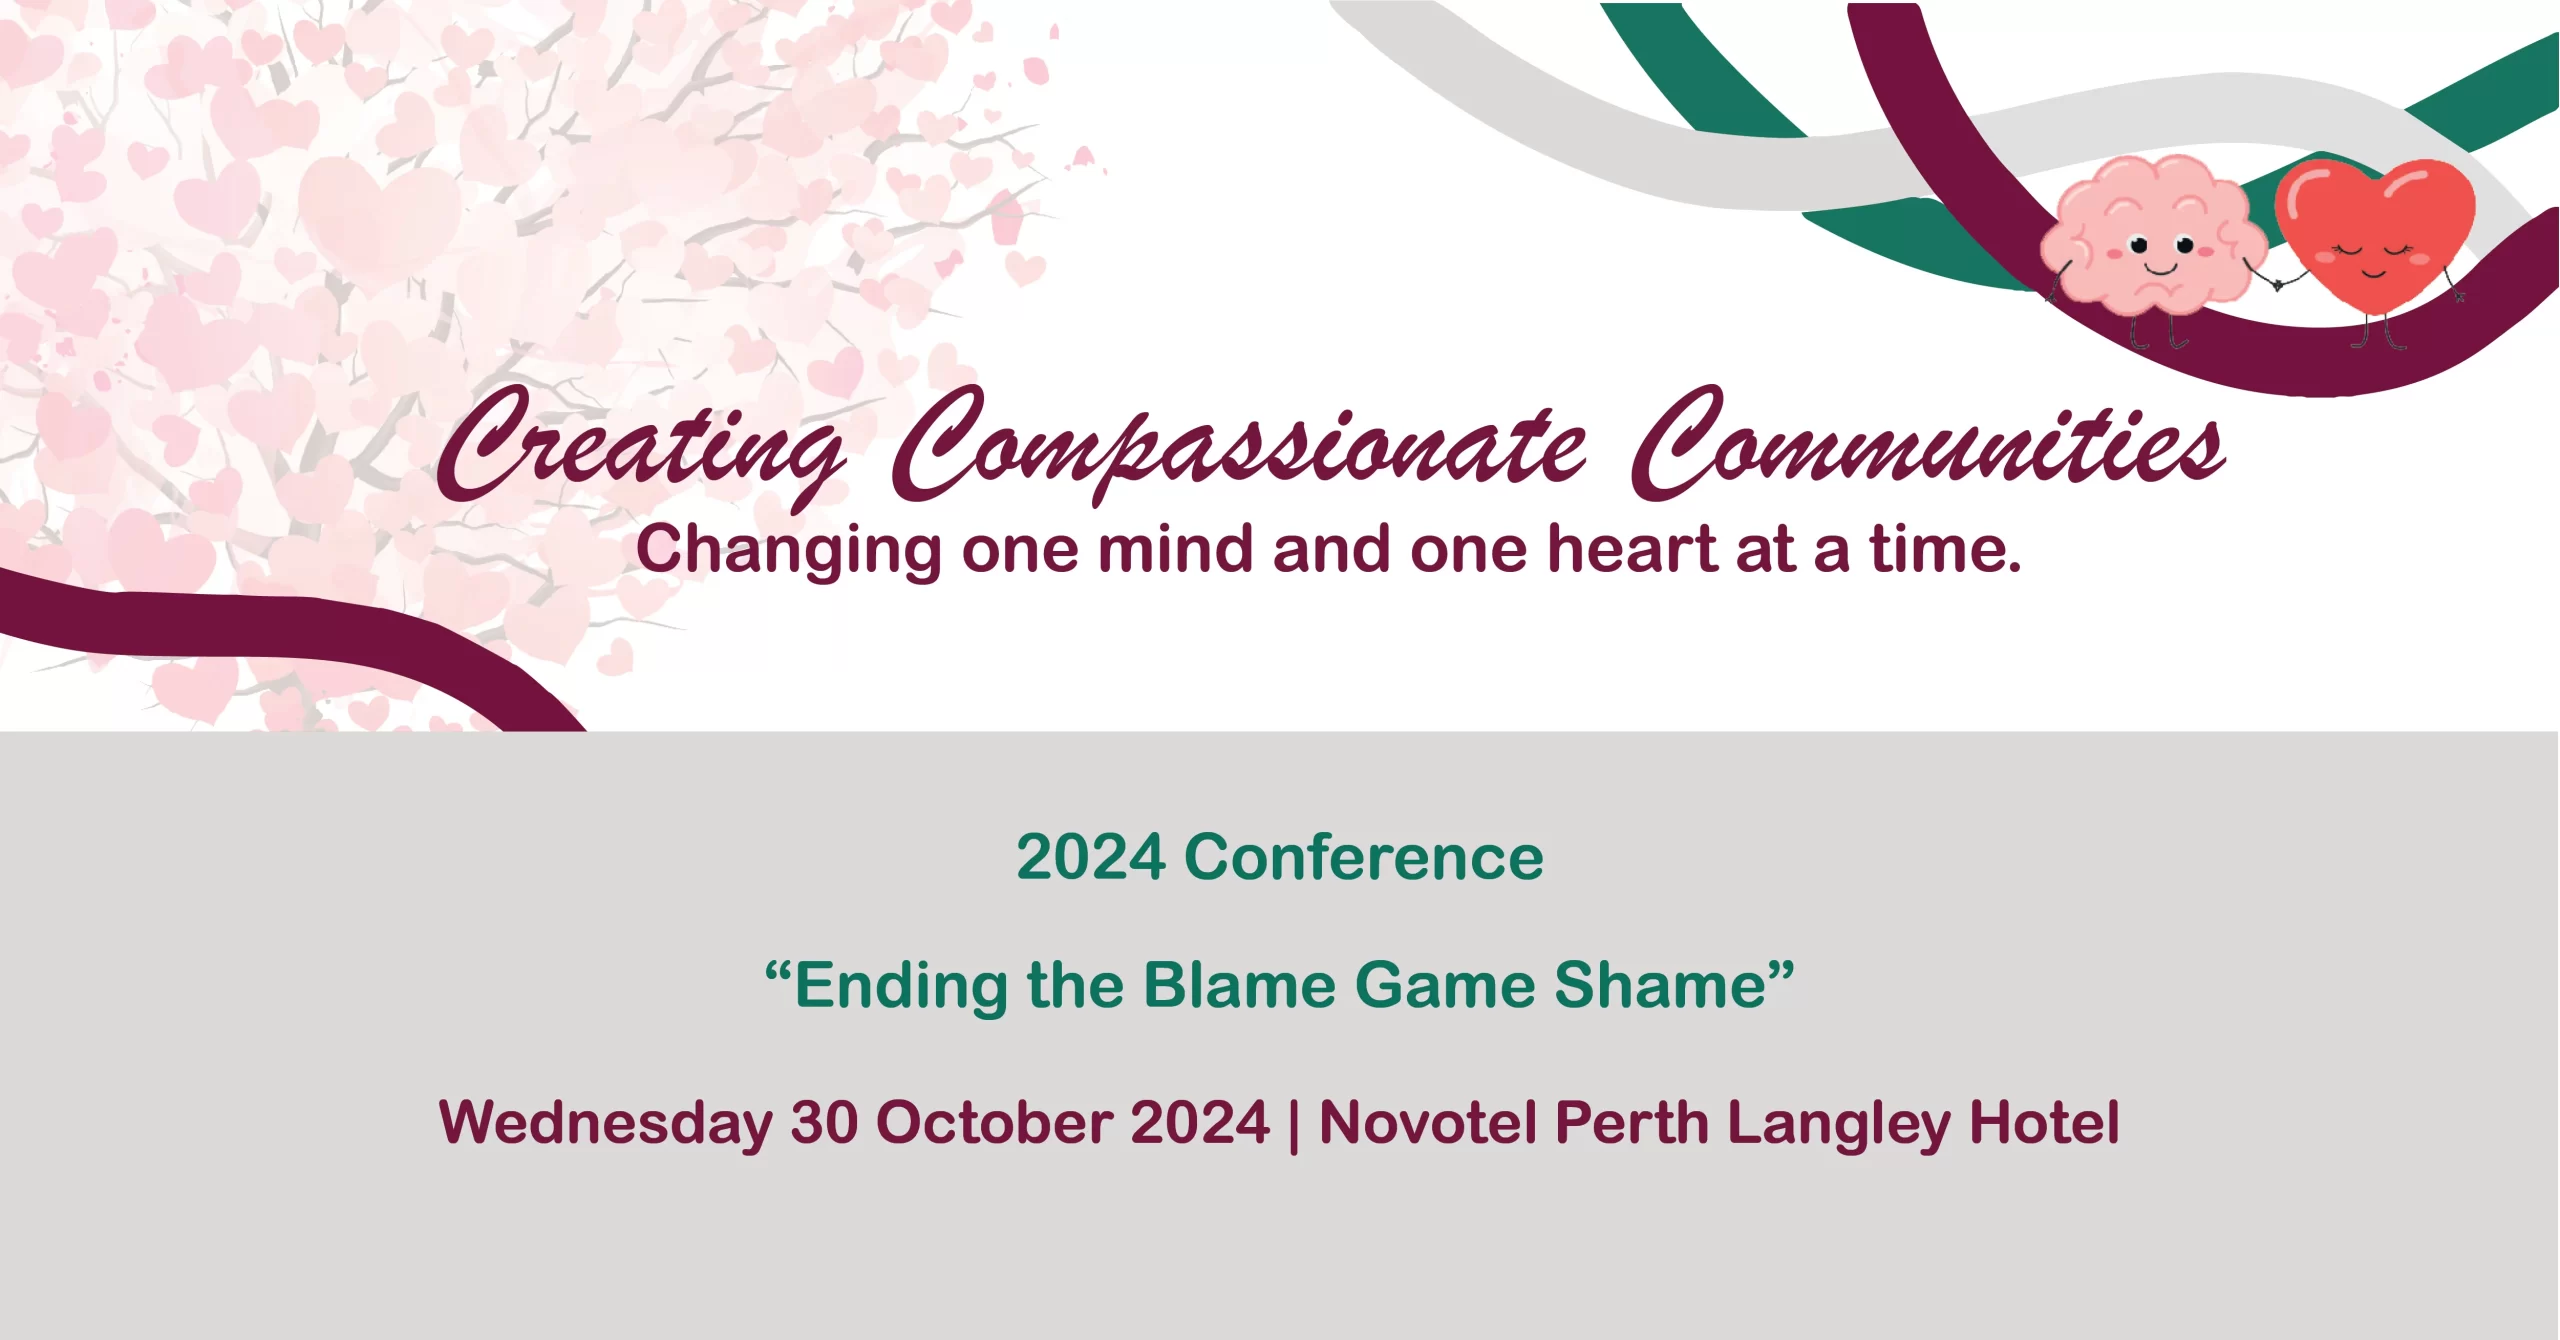 Creating Compassionate Communities Conference 2024 | Ending the Blame Game Shame